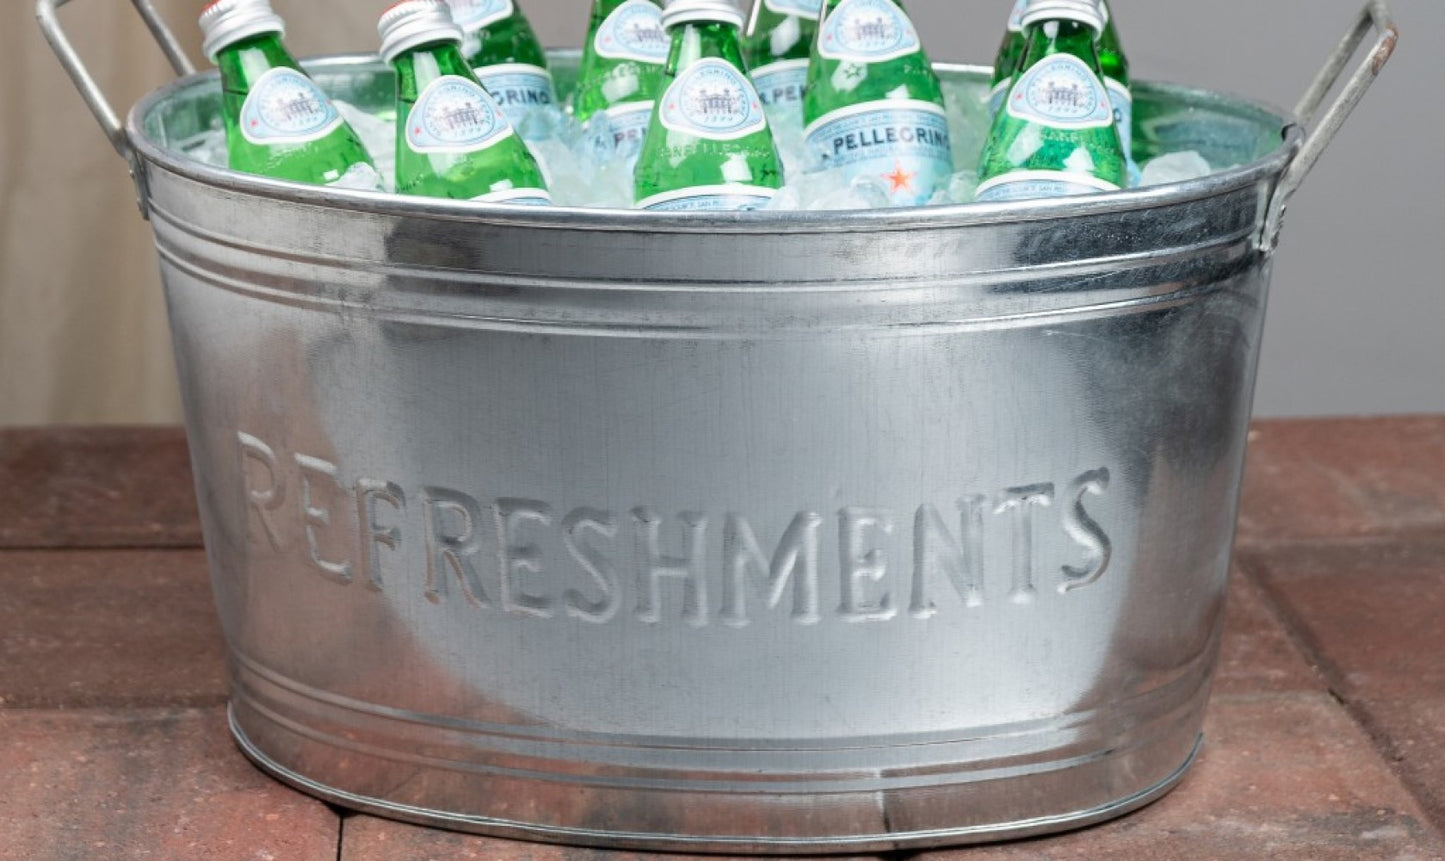 Refreshments Oval Stainles Steel Galvanized Beverage Tub-5